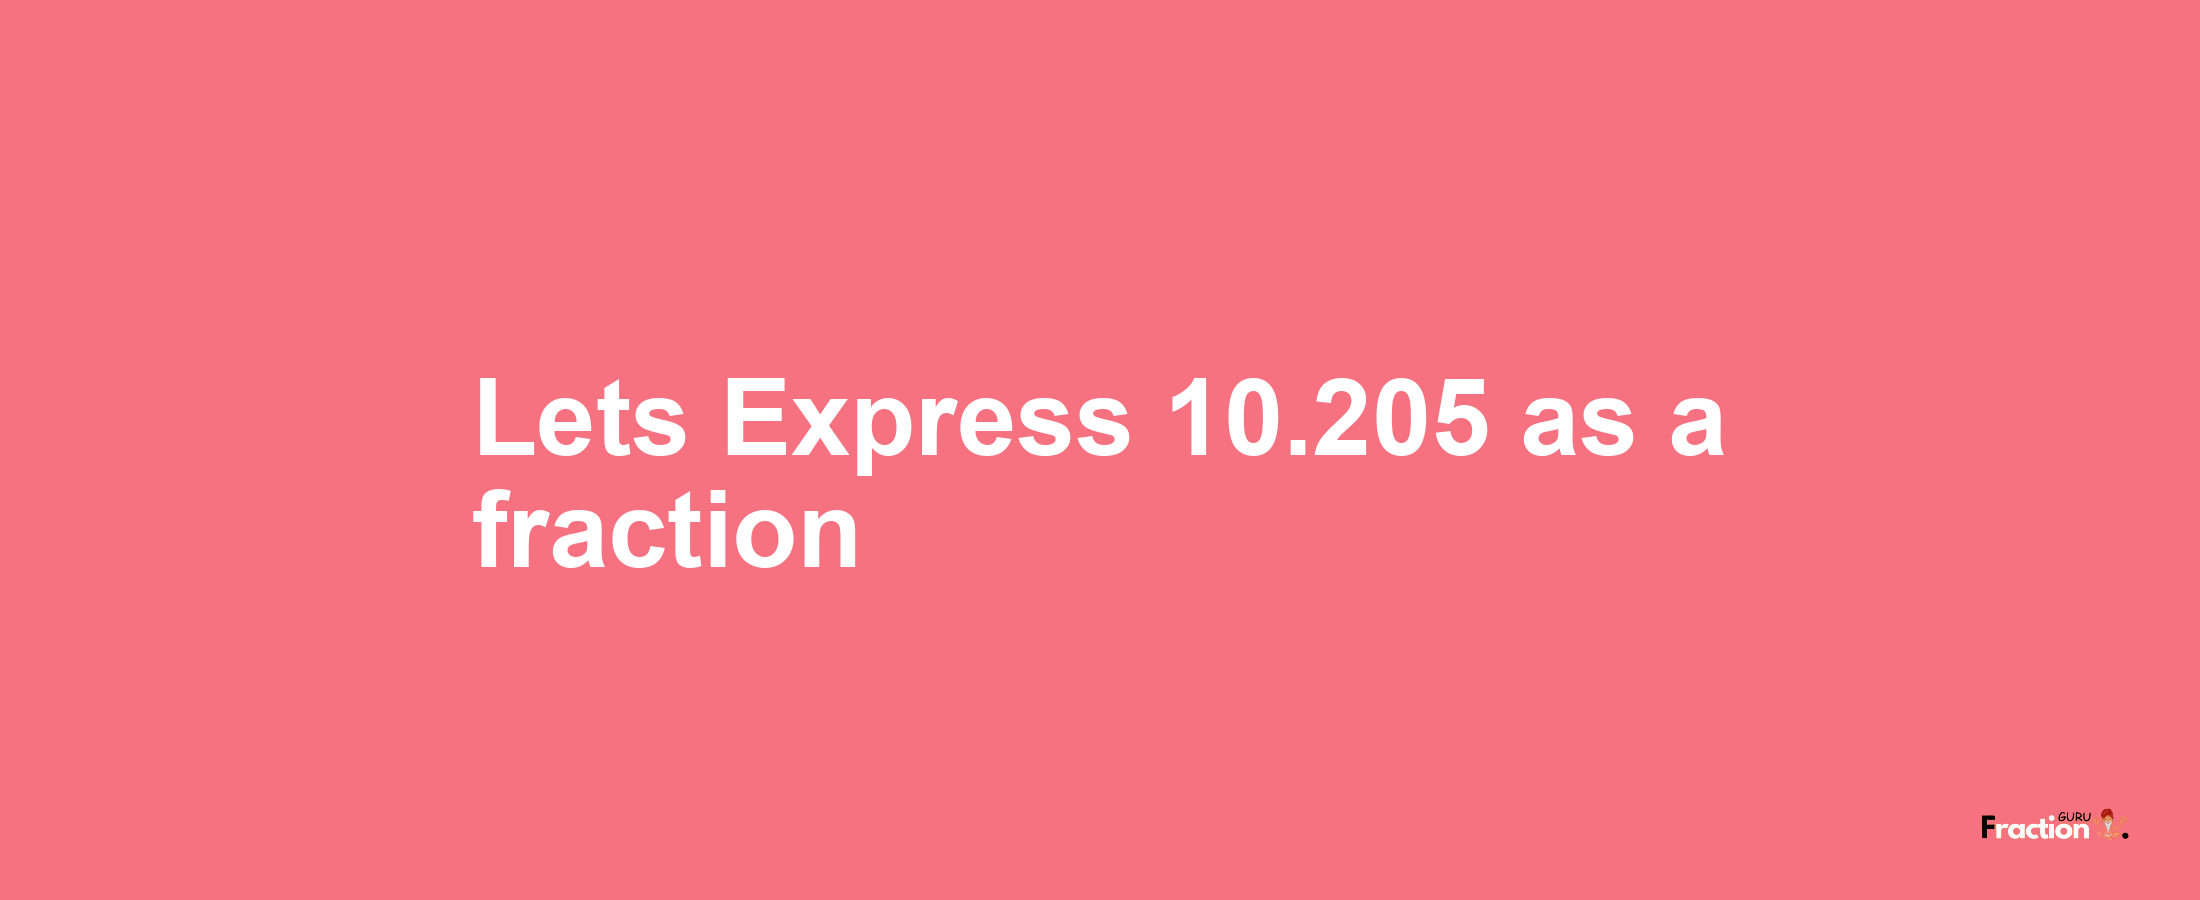 Lets Express 10.205 as afraction